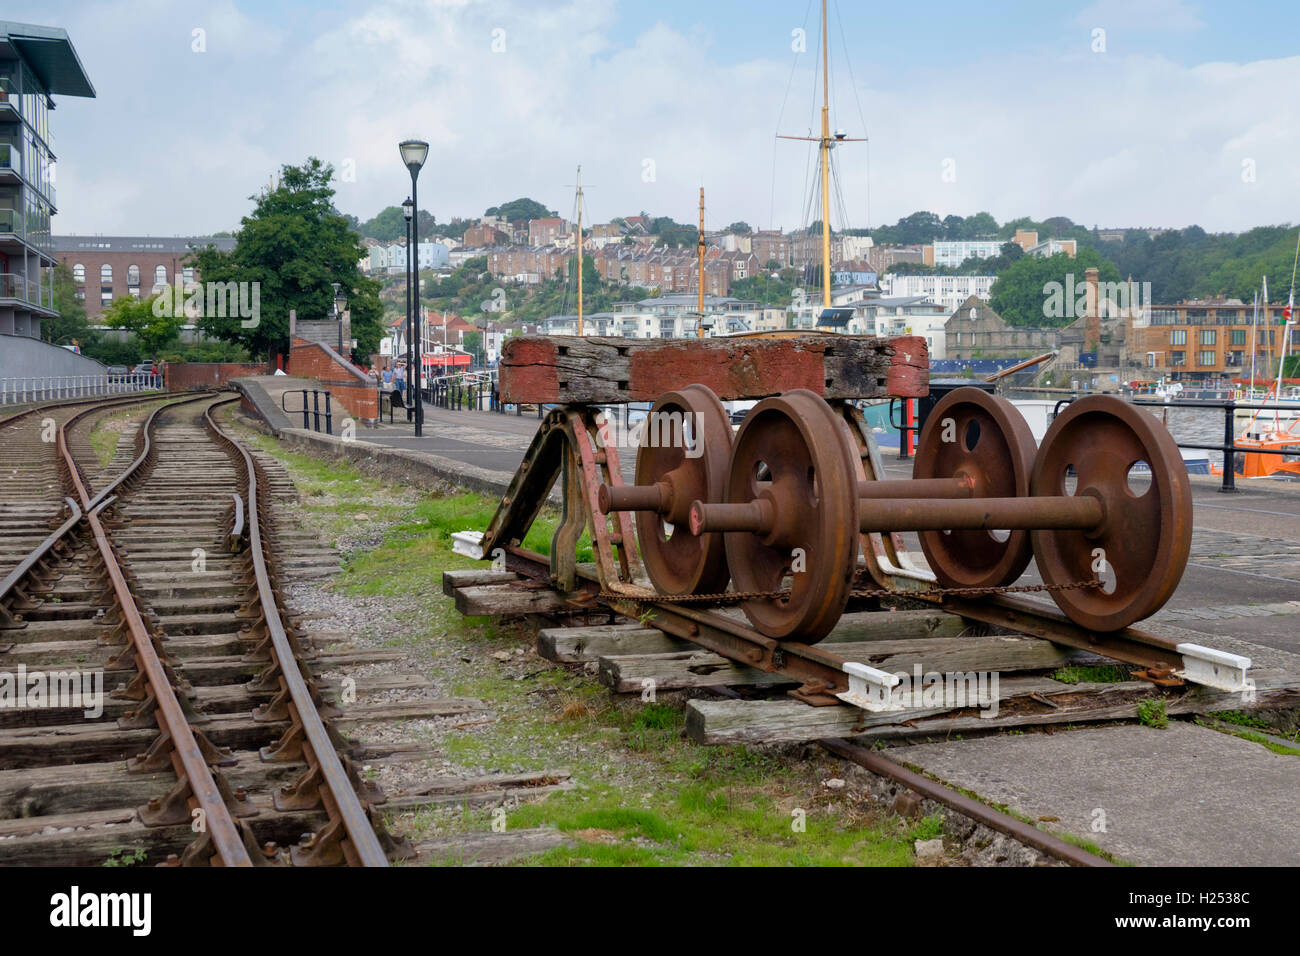 Views around the City of Bristol England UK Rolling stock or bogies on the harbourside Stock Photo